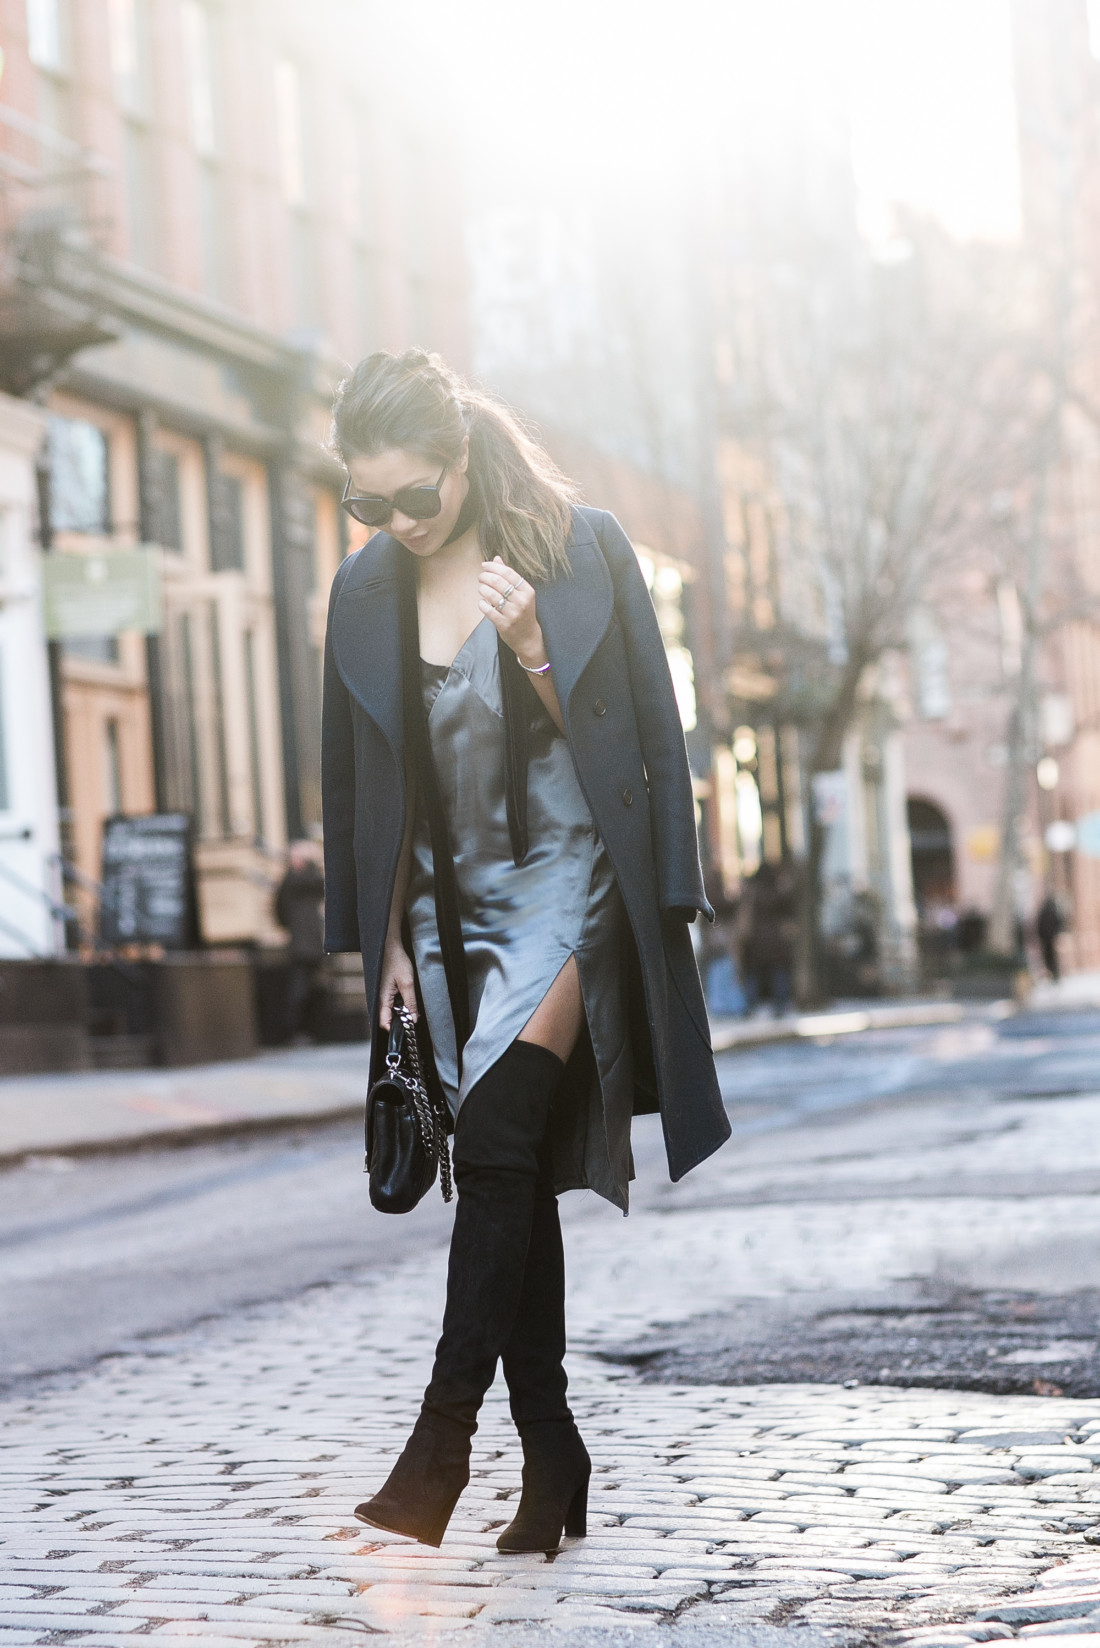 slip dress with boots